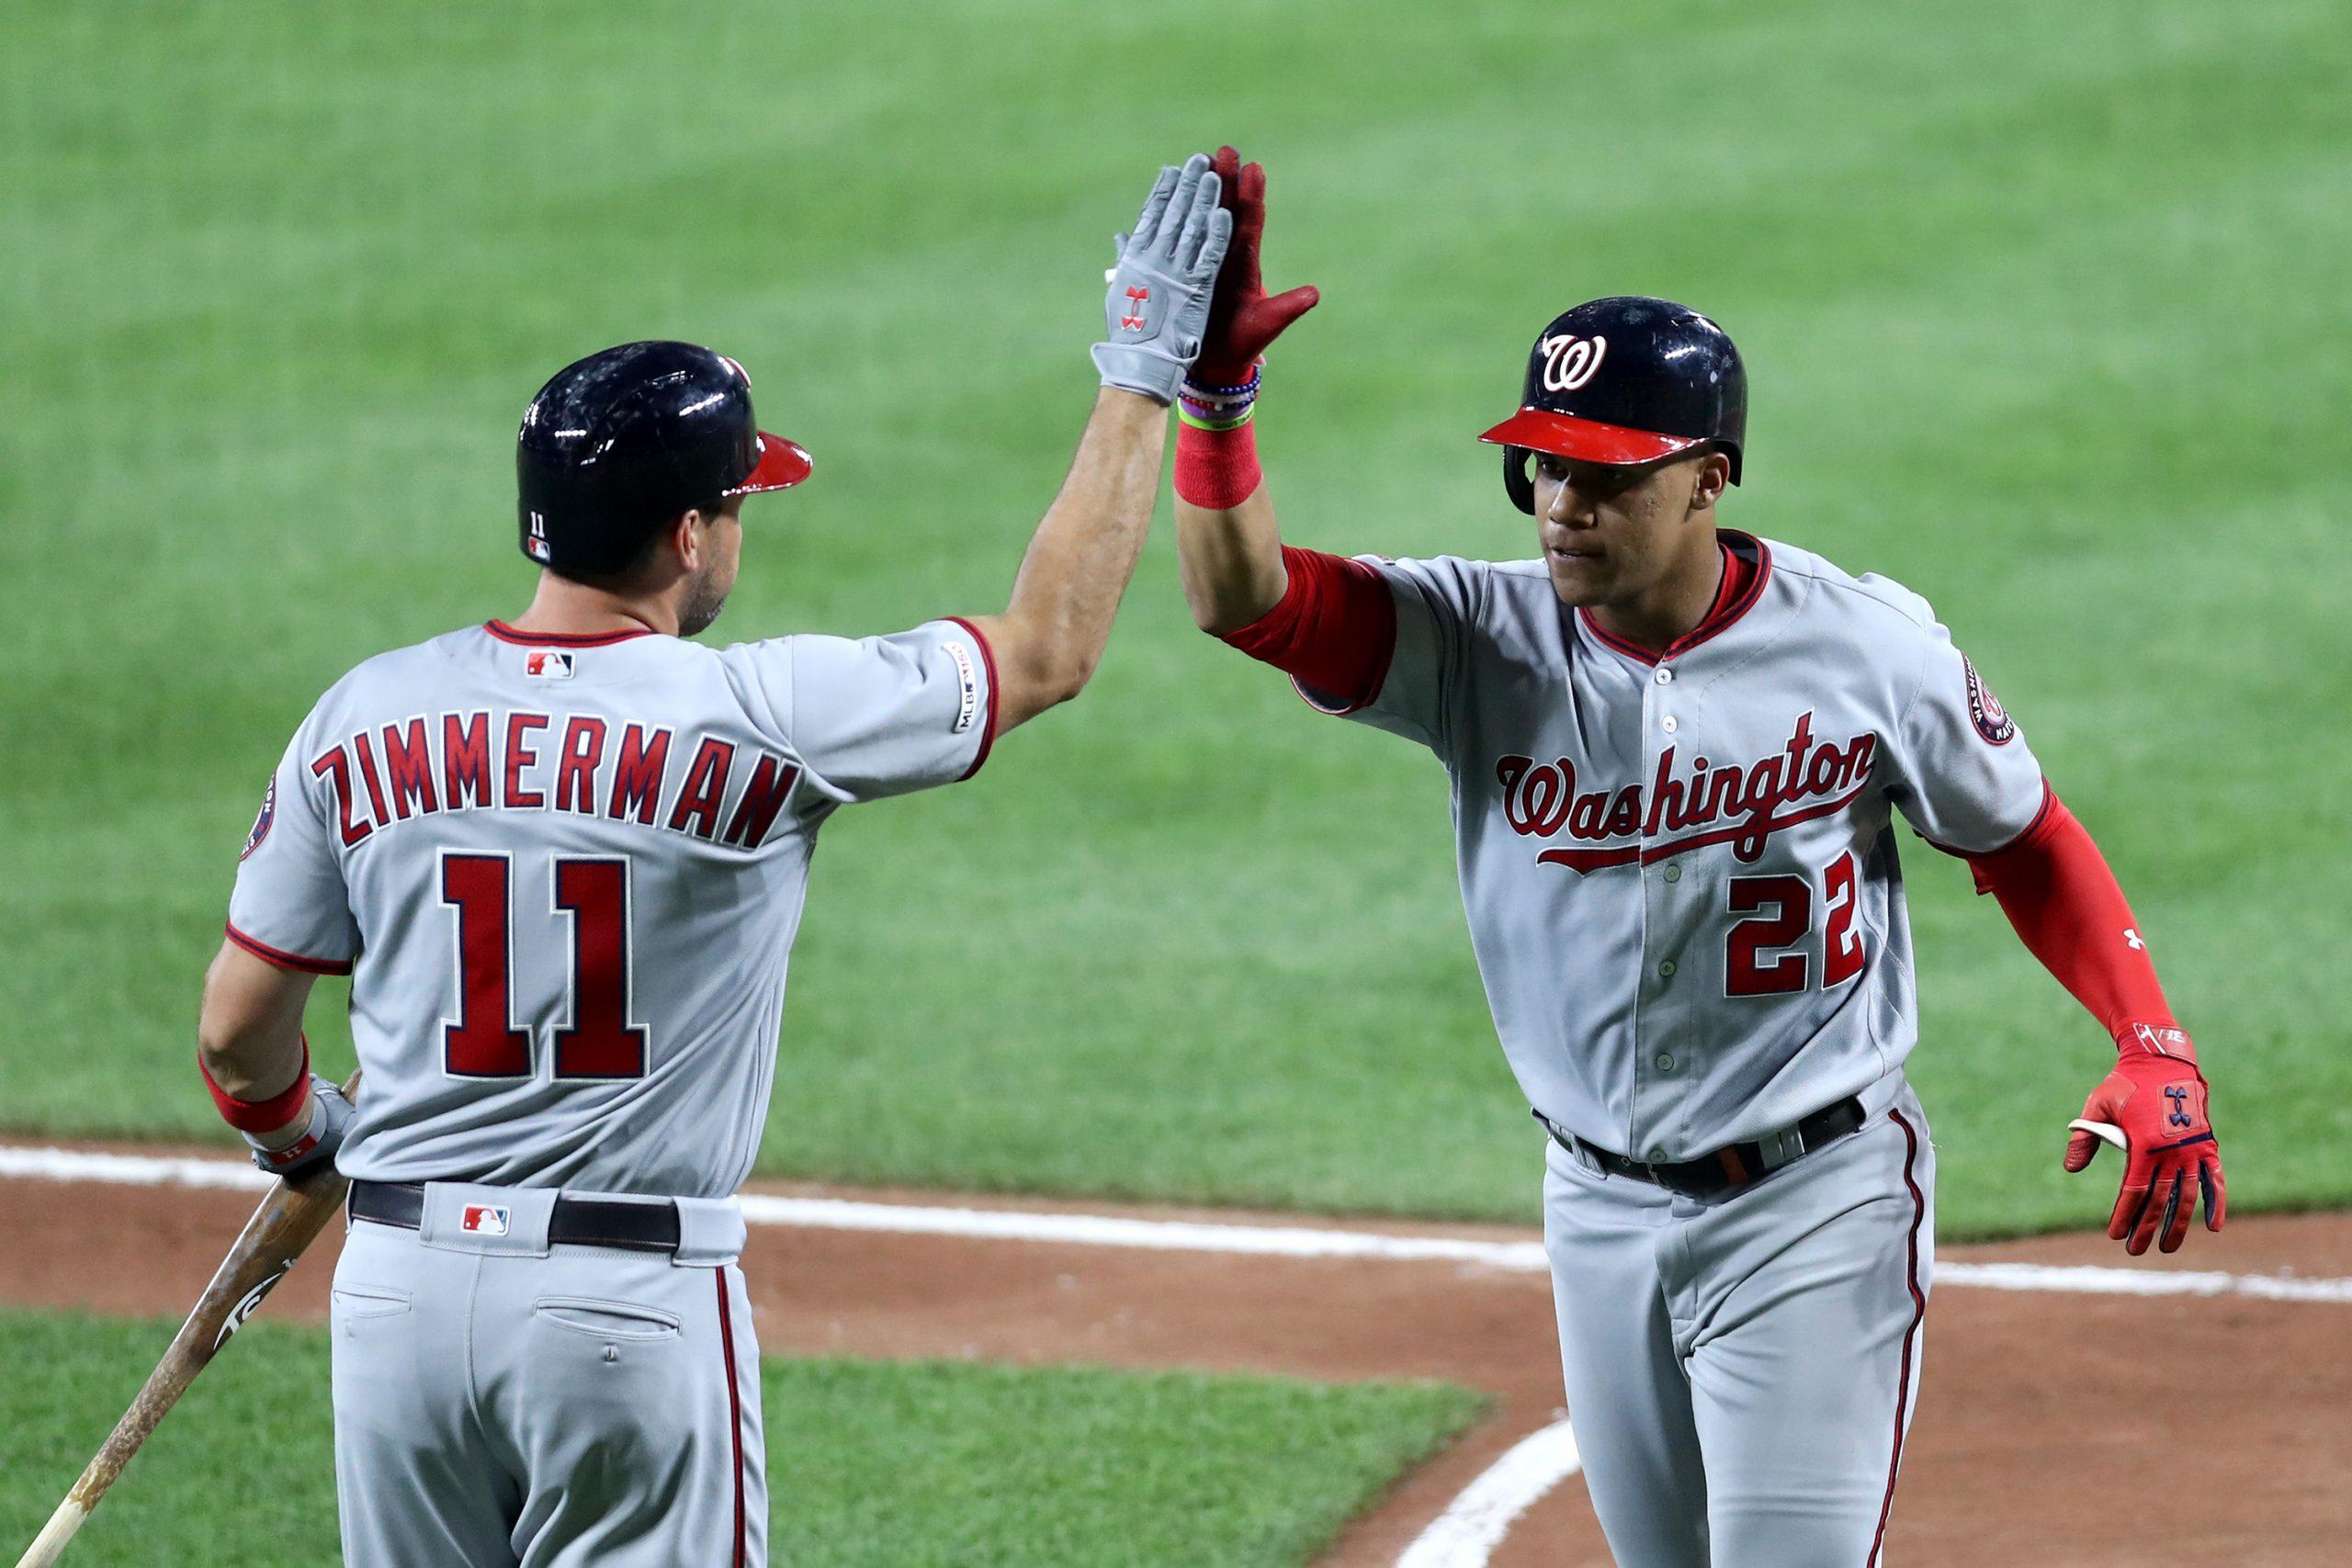 Juan Soto #22 of the Washington Nationals celebrates with Ryan Zimmerman #11 after hitting a solo home run in the sixth inning against the Baltimore Orioles at Oriole Park at Camden Yards on July 16, 2019 in Baltimore, Maryland. (Rob Carr/Getty Images/TNS) **FOR USE WITH THIS STORY ONLY**